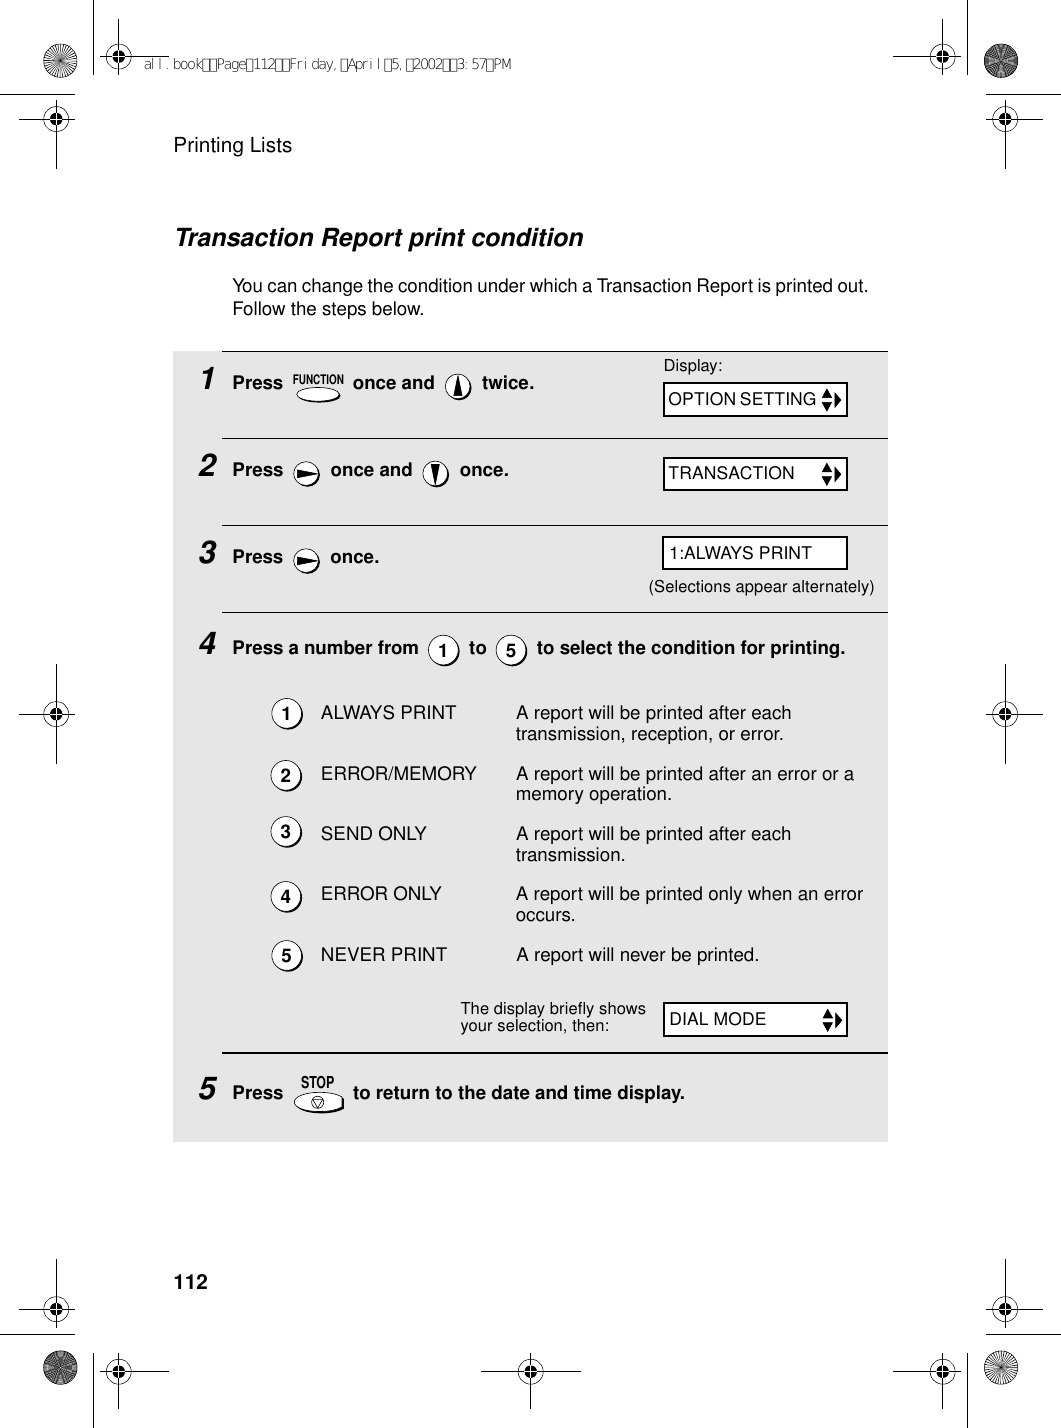 Printing Lists112Transaction Report print conditionYou can change the condition under which a Transaction Report is printed out. Follow the steps below.1Press   once and   twice.2Press   once and   once.3Press  once.4Press a number from   to   to select the condition for printing.5Press   to return to the date and time display.ALWAYS PRINT A report will be printed after each transmission, reception, or error.ERROR/MEMORY A report will be printed after an error or a memory operation.SEND ONLY A report will be printed after each transmission.ERROR ONLY A report will be printed only when an error occurs.NEVER PRINT A report will never be printed.FUNCTION1 5STOPDisplay:The display briefly shows your selection, then:12345OPTION SETTING TRANSACTION DIAL MODE 1:ALWAYS PRINT(Selections appear alternately)all.bookPage112Friday,April5,20023:57PM